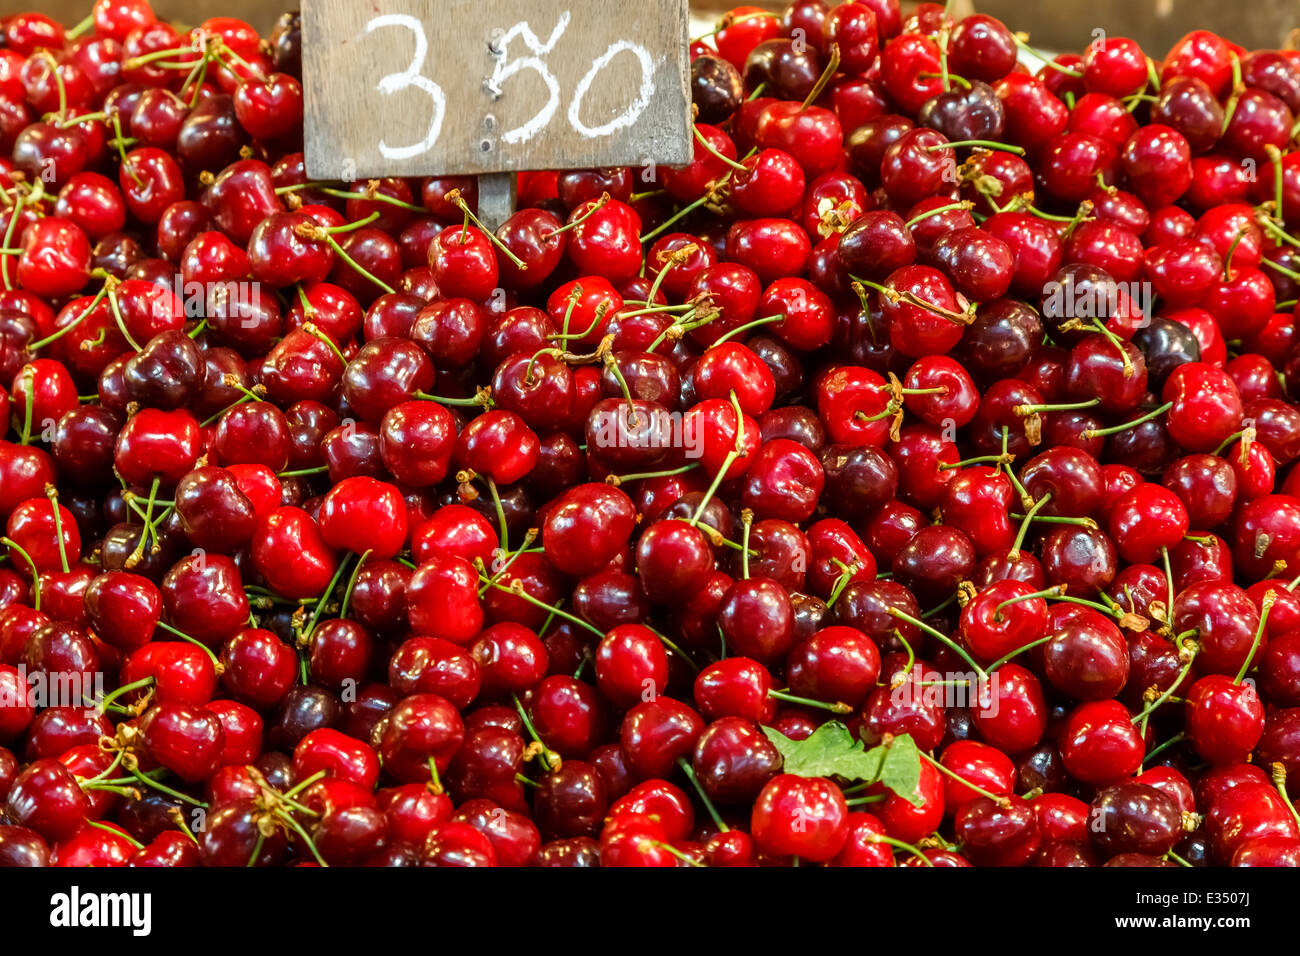 Red cherries in food market with price tag as a background texture Stock Photo